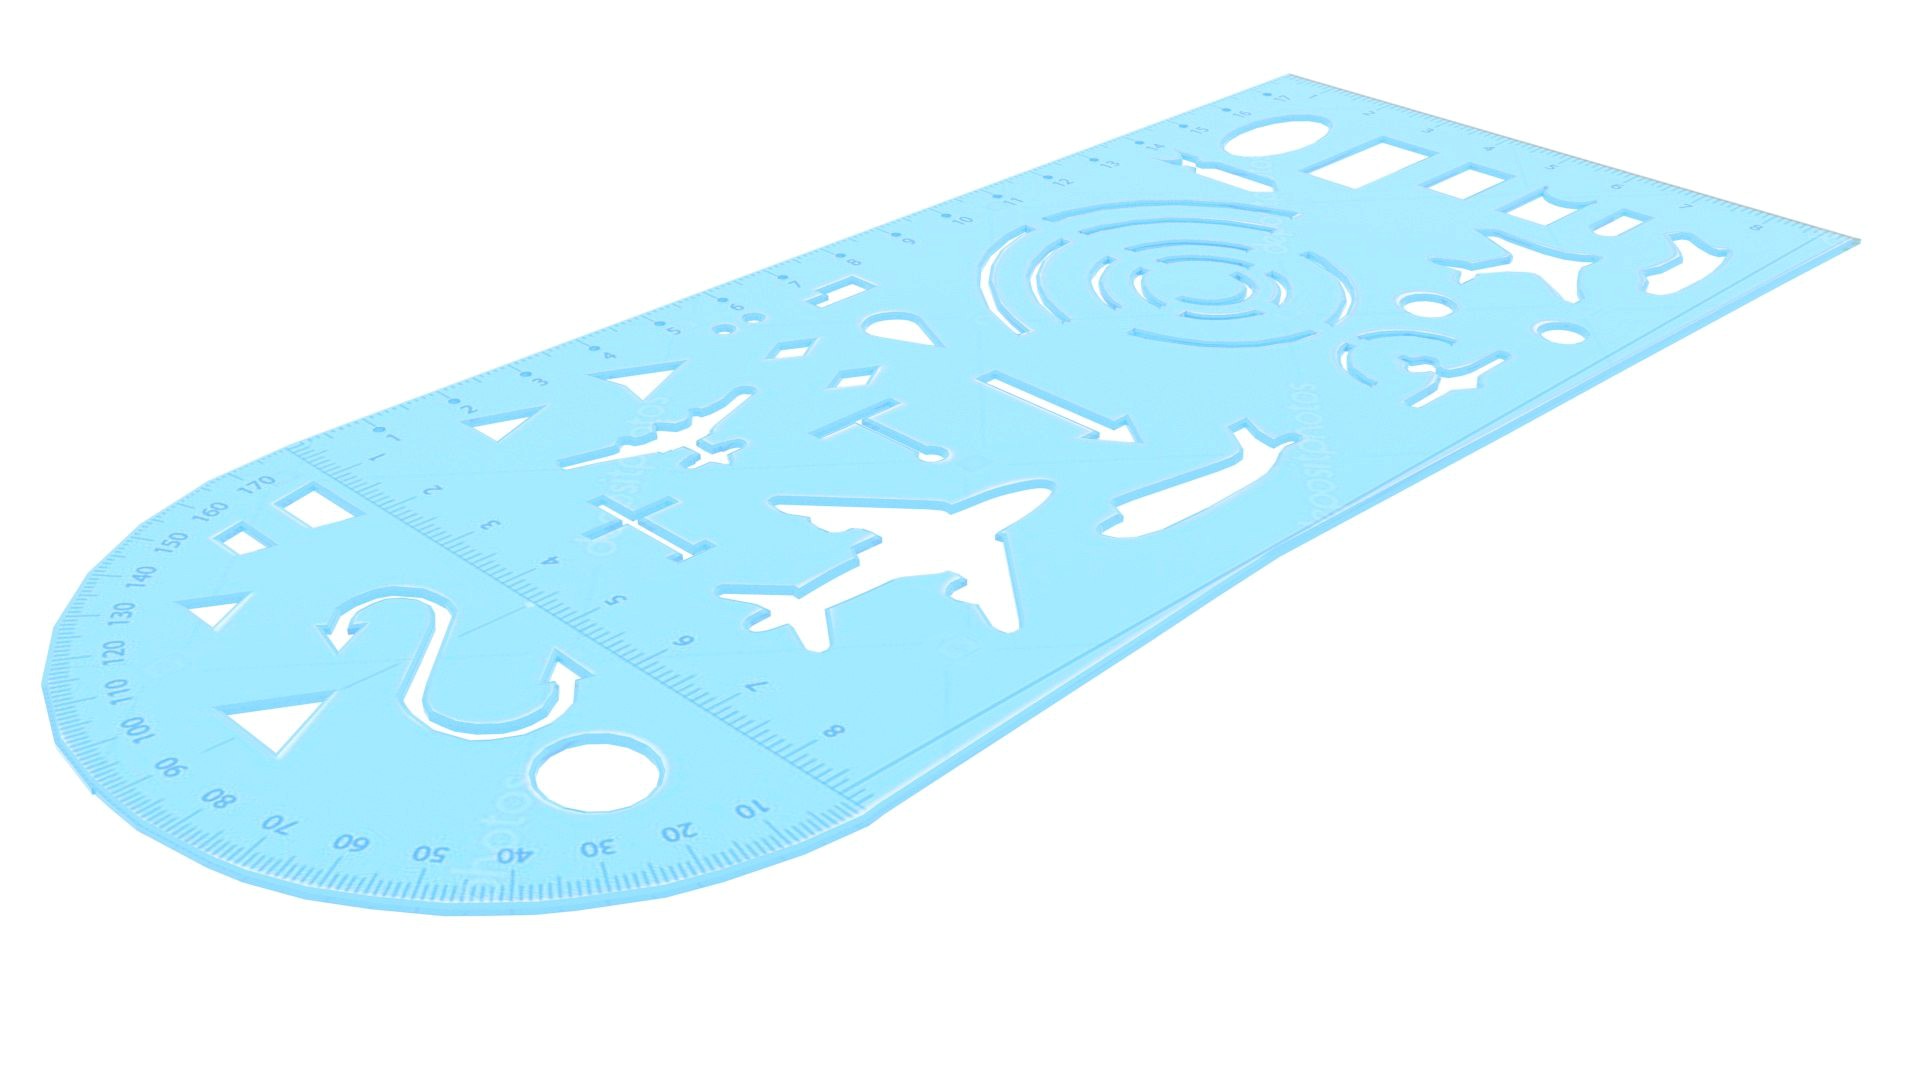 Stencil Ruler With Planes